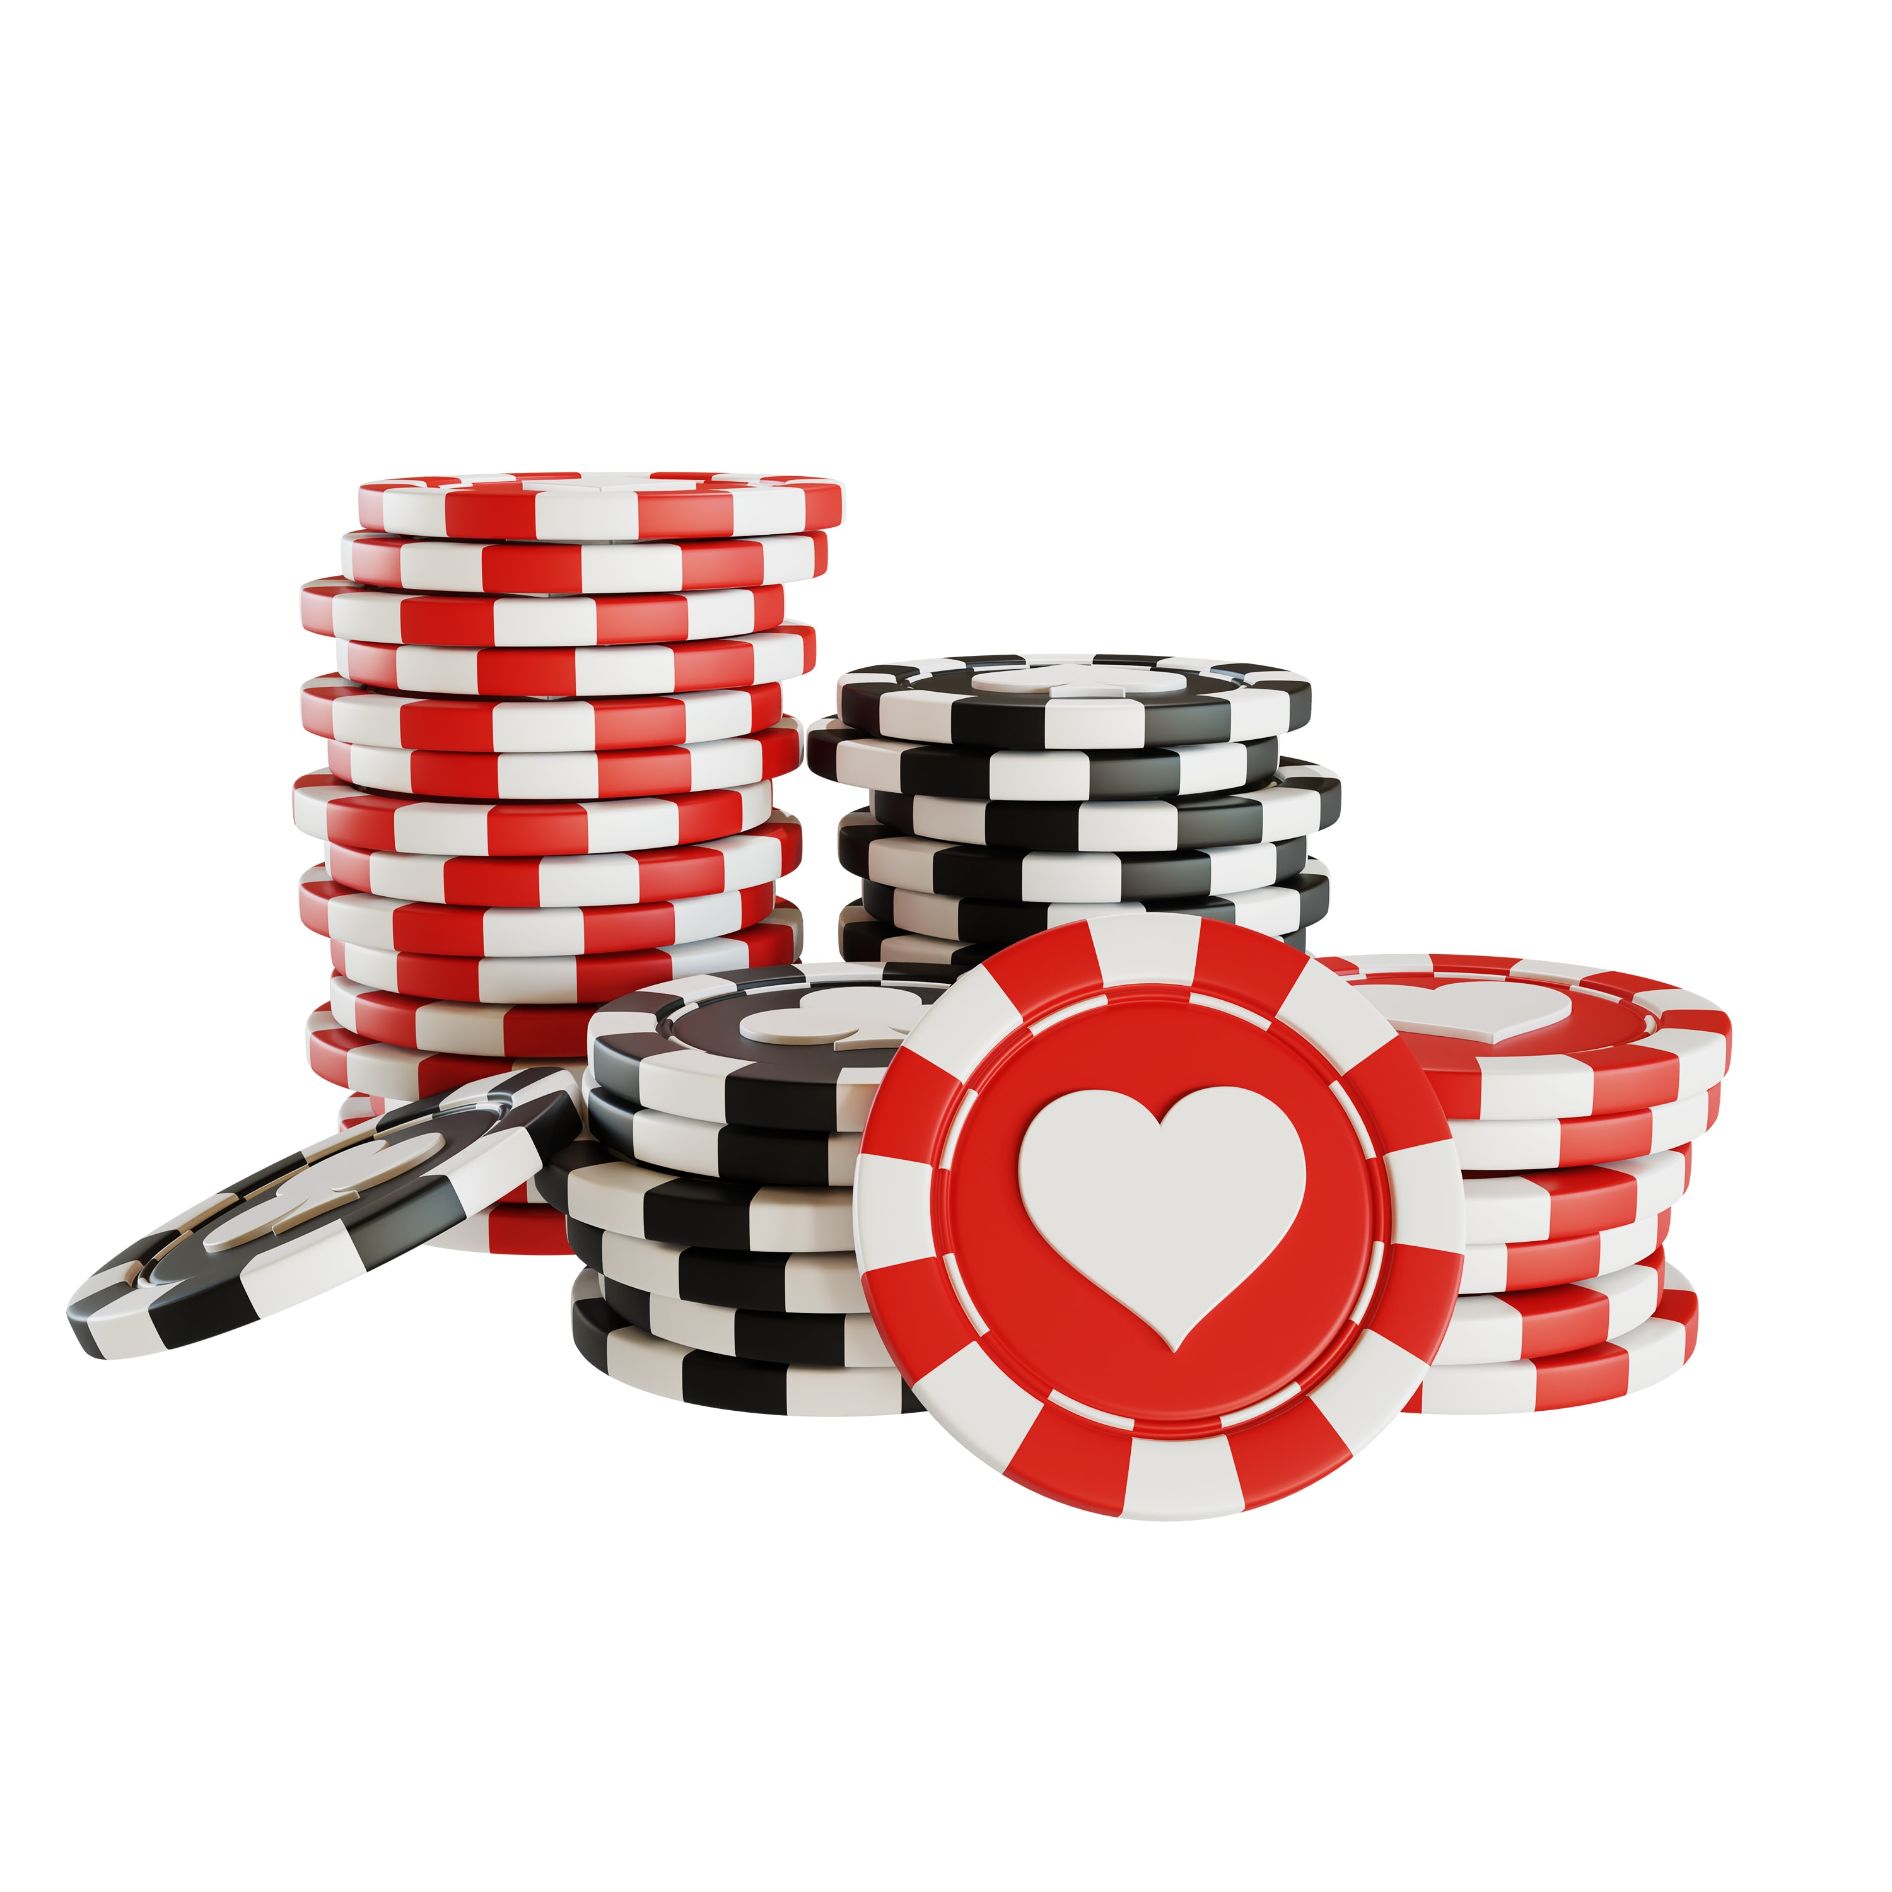 A stack of poker chips on a white background.